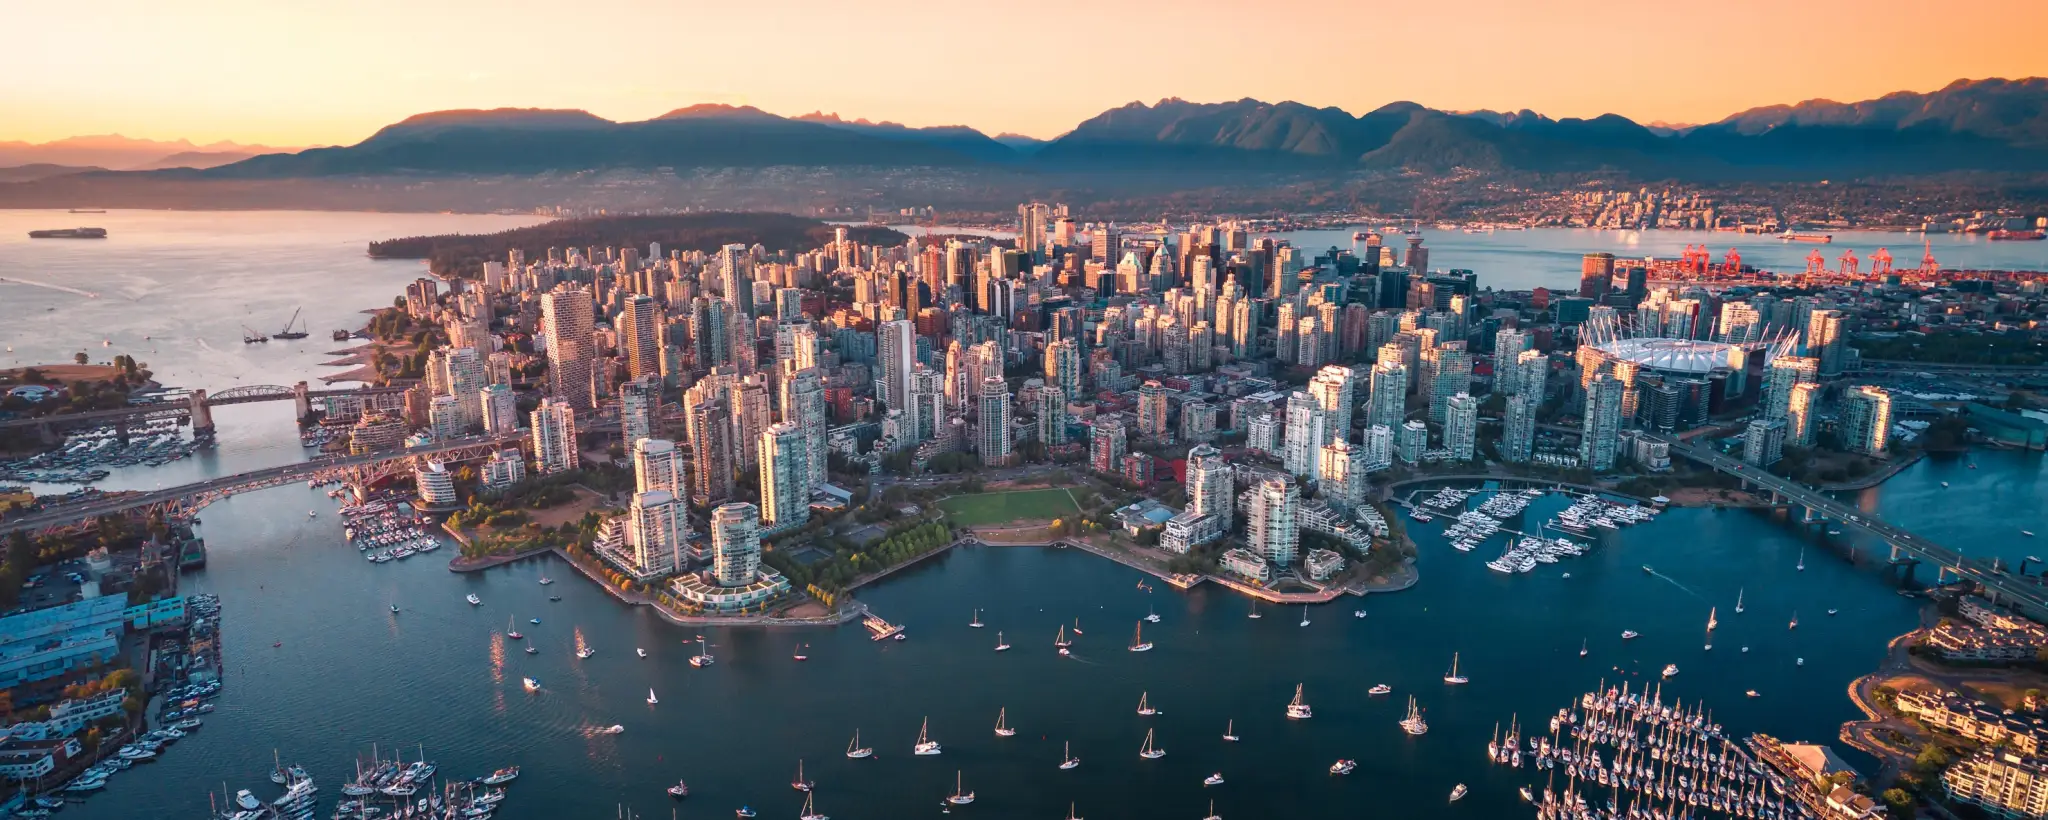 Overview photo of Vancouver, BC